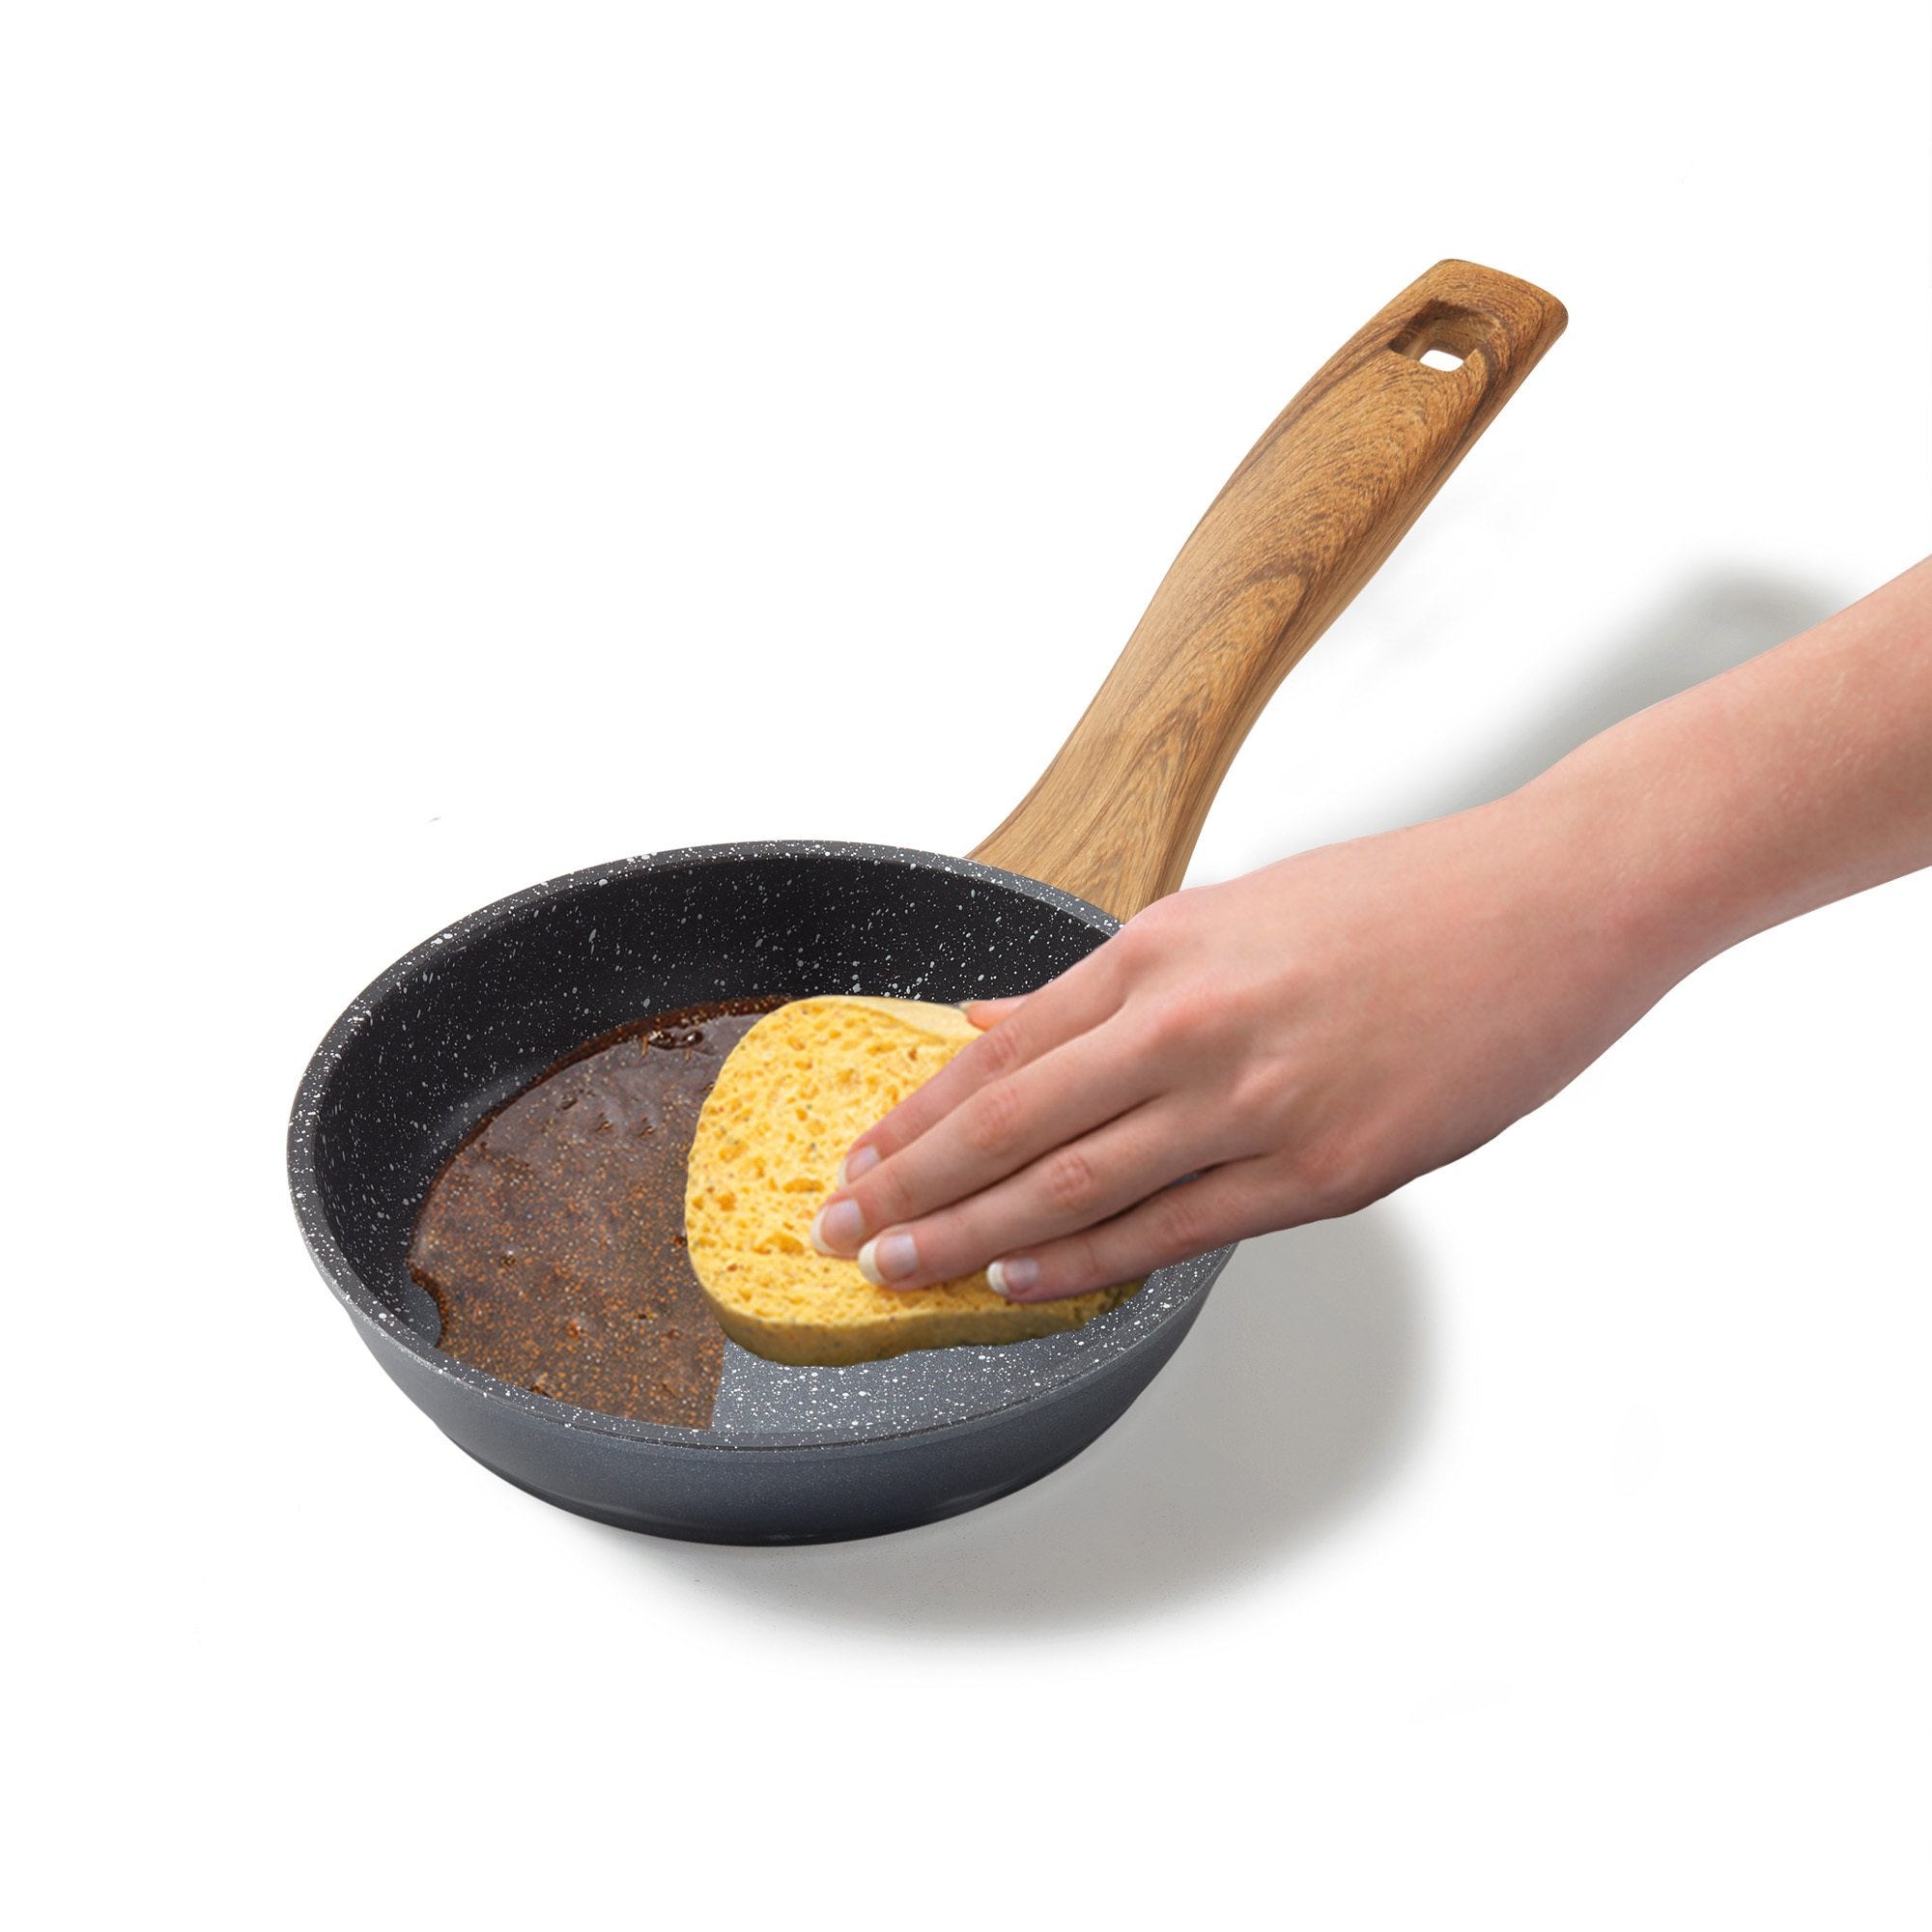 STONELINE® Back to Nature frying pan 16 cm, non-stick omelette pan, induction suitable